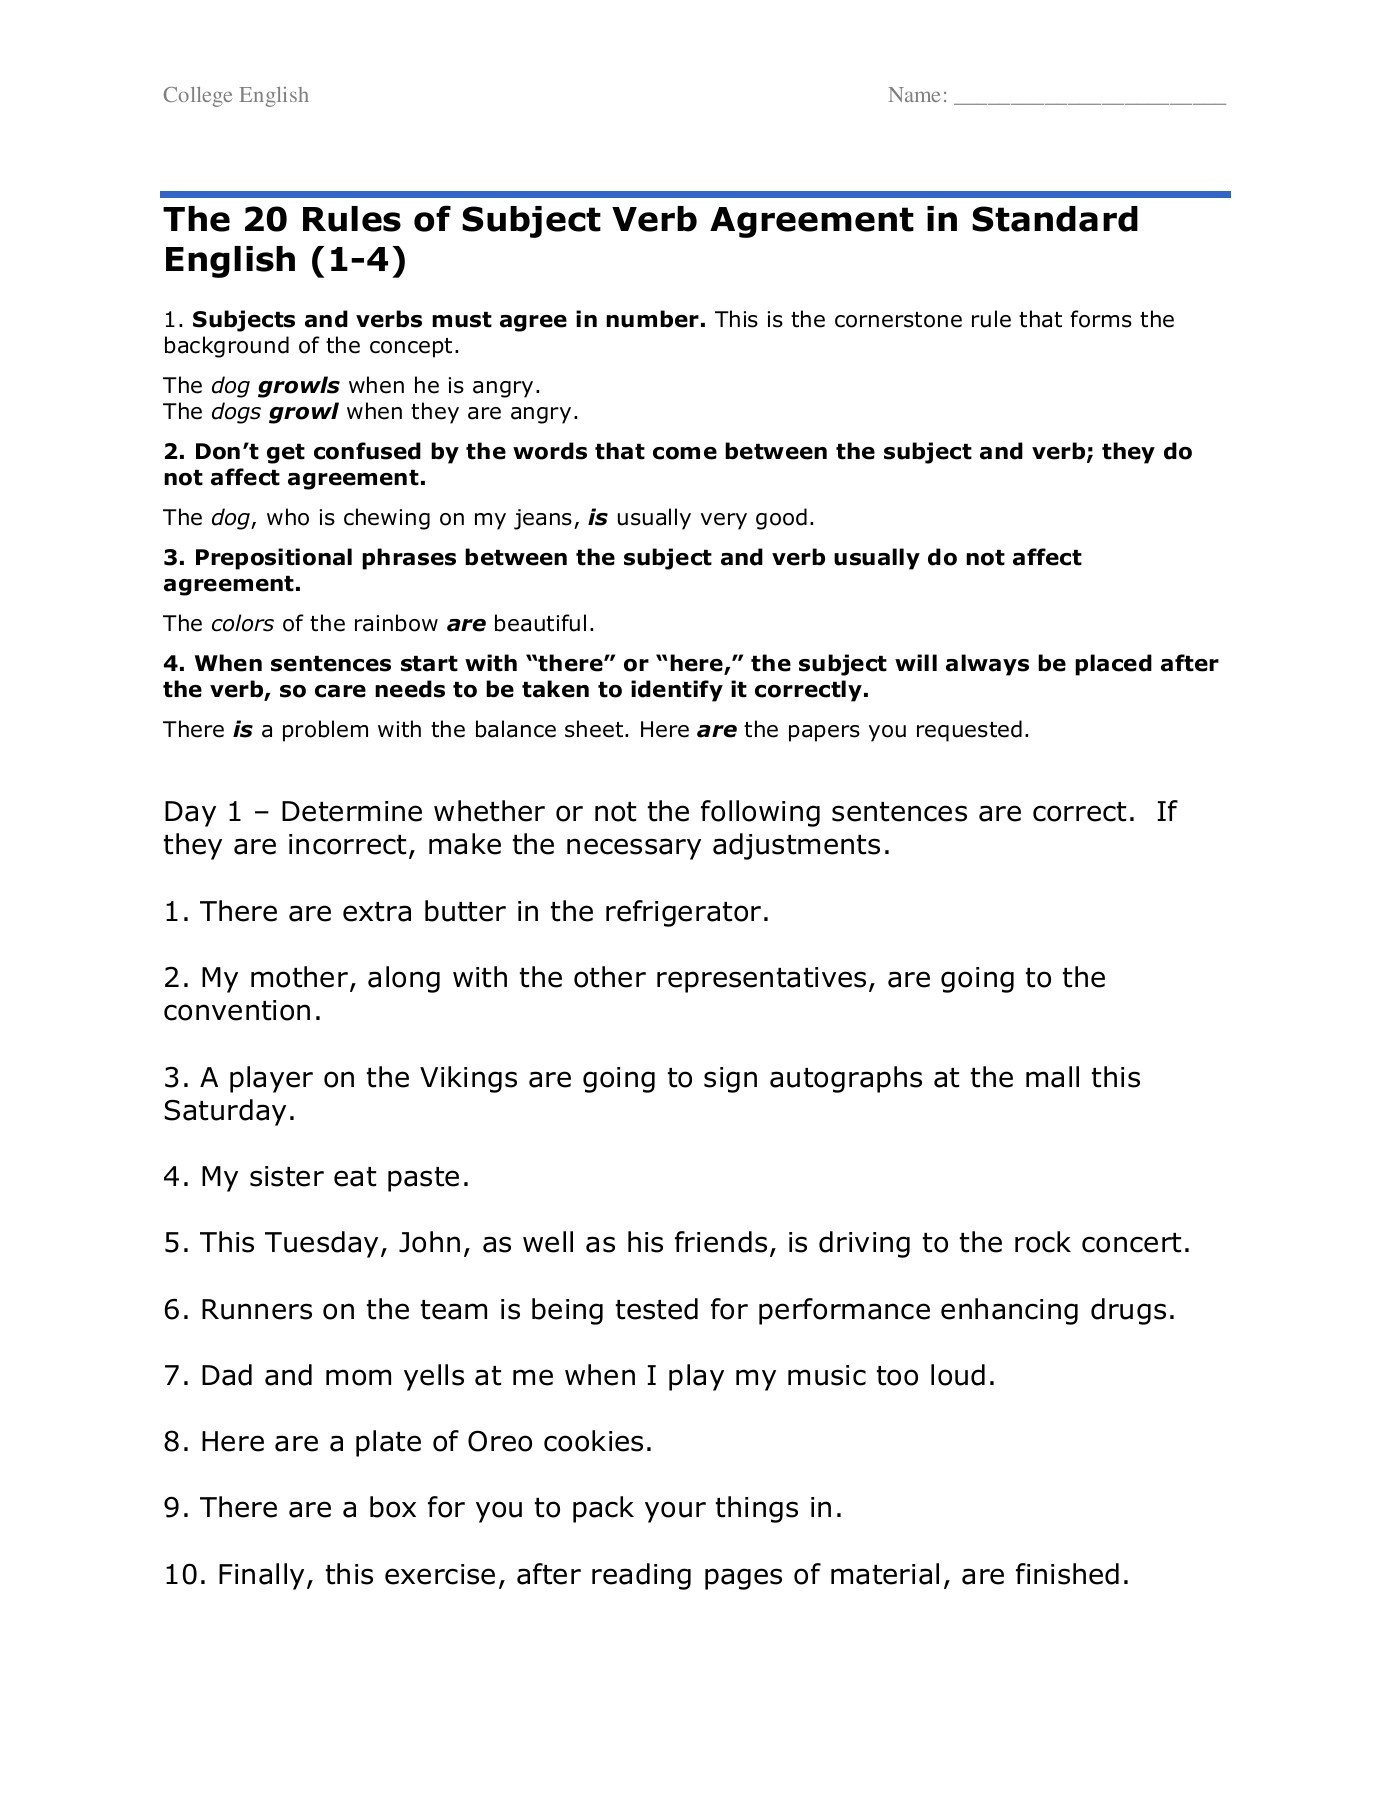 Definition Of Verb Agreement The 20 Rules Of Subject Verb Agreement In Standard English Pages